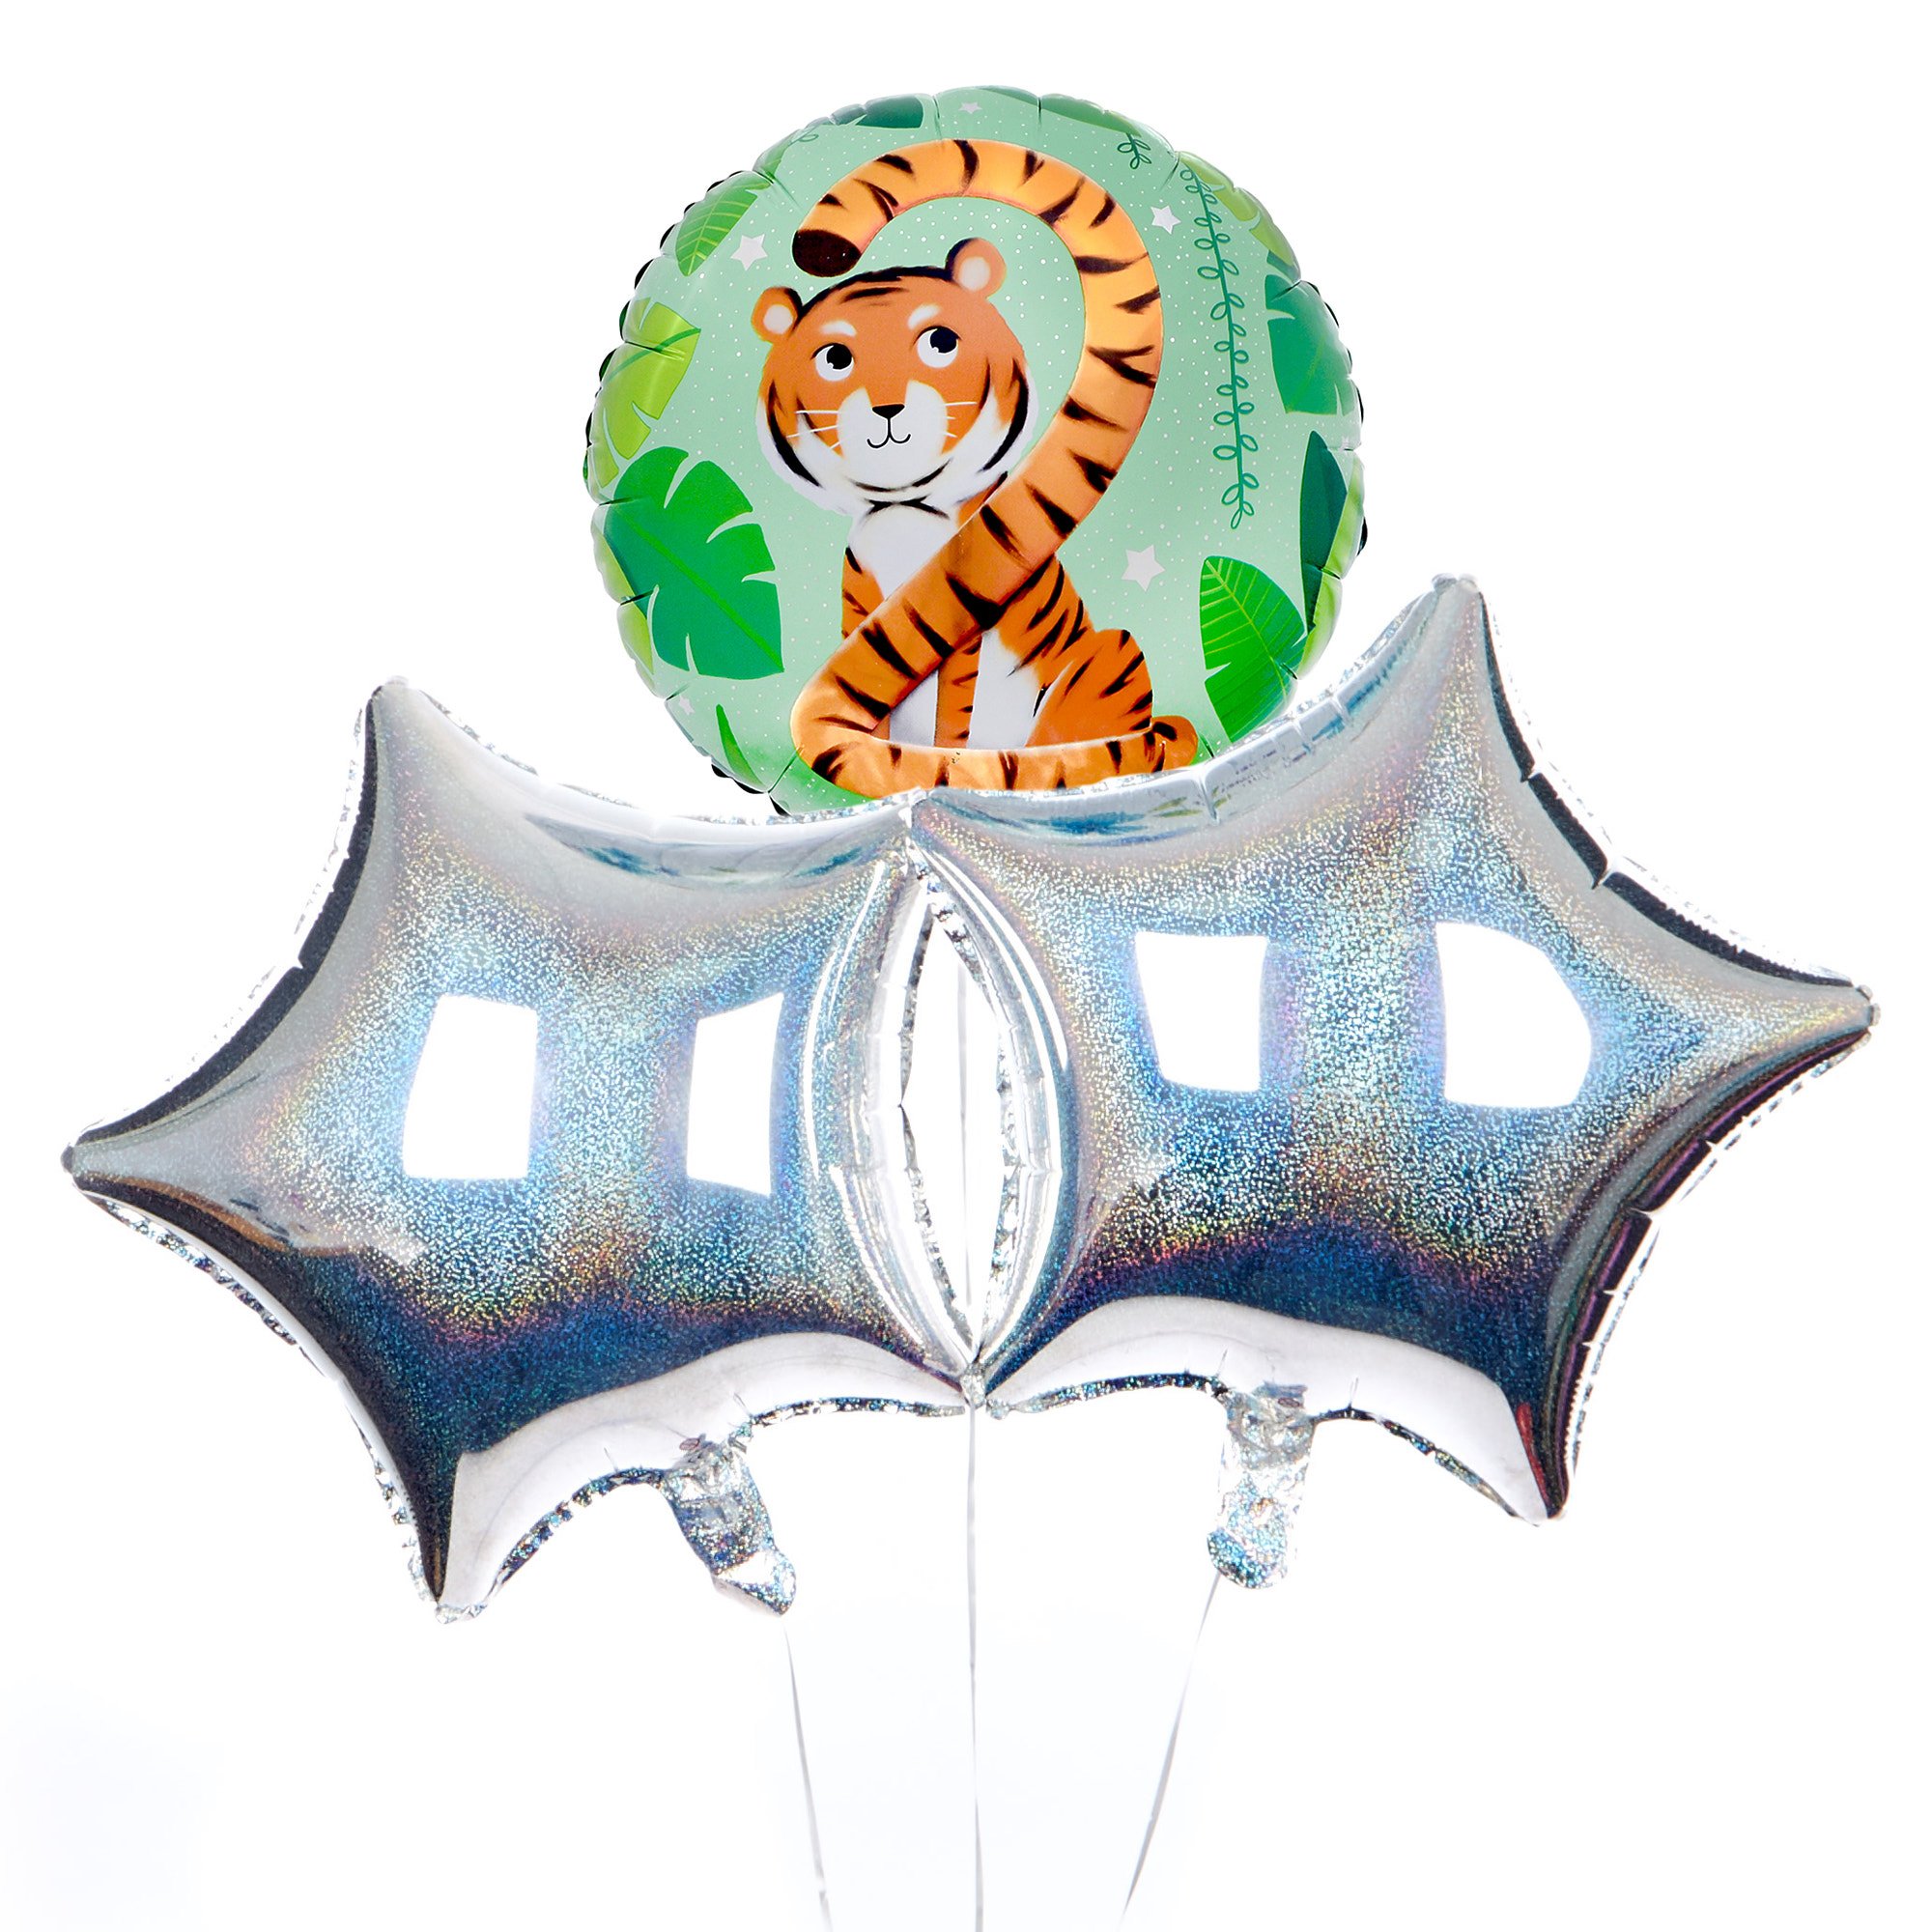 Tiger Themed 2nd Birthday Balloon Bouquet - DELIVERED INFLATED!